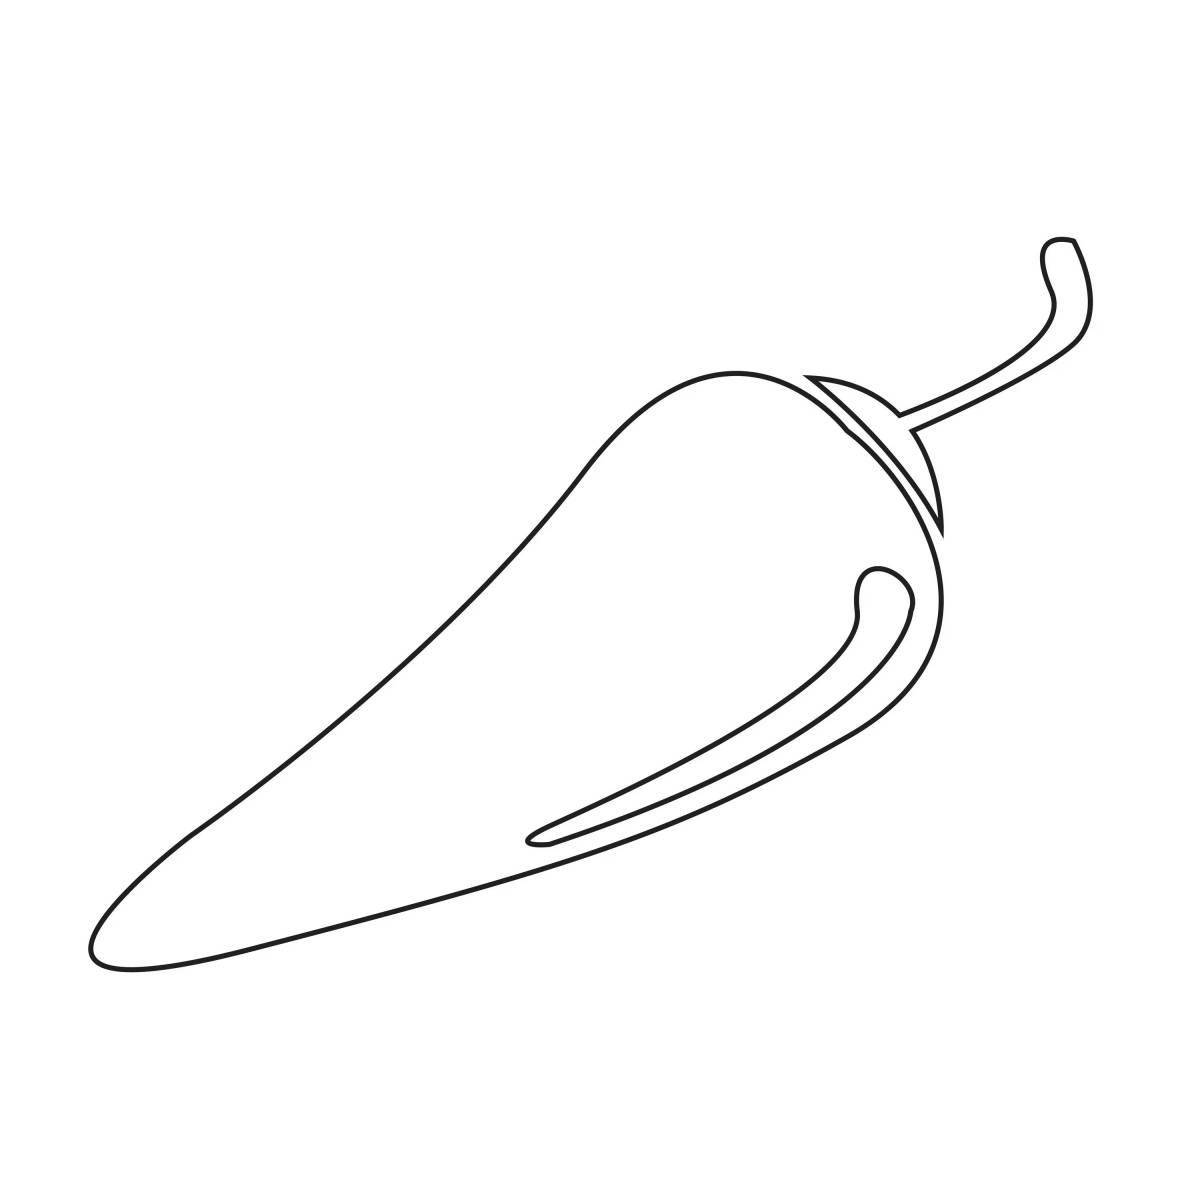 Colorful chili coloring page